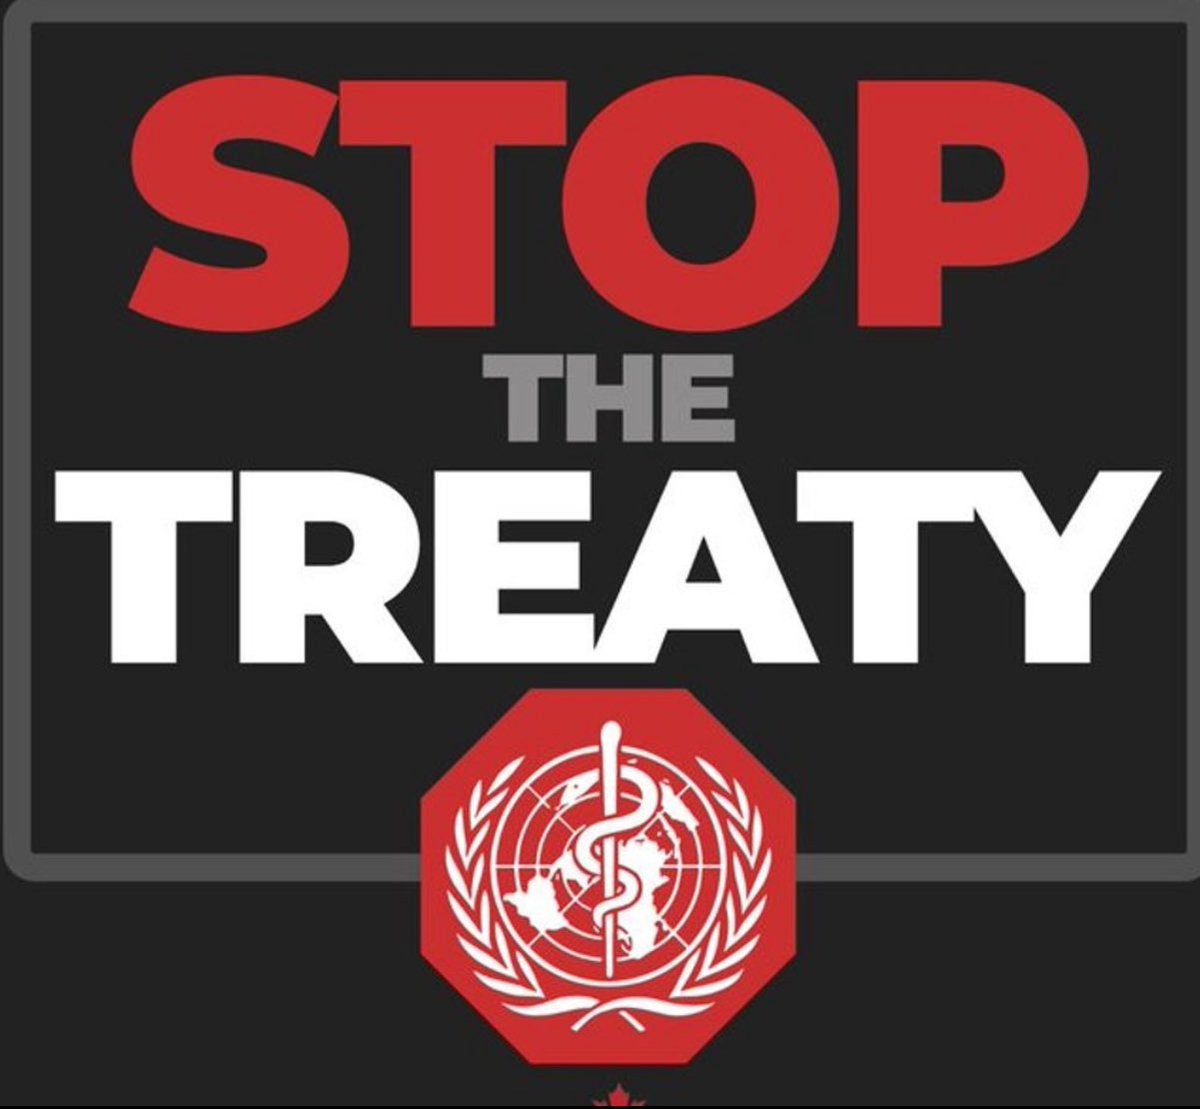 🔥WHO - The Pandemic Treaty & IHR amendment negotiations continue. So far members have failed to reach agreement

We have a last chance to be heard. And the best way to do that is to flood X with your voice!

Make it loud! Retweet …

STOP. THE. TREATY! #stopthetreaty